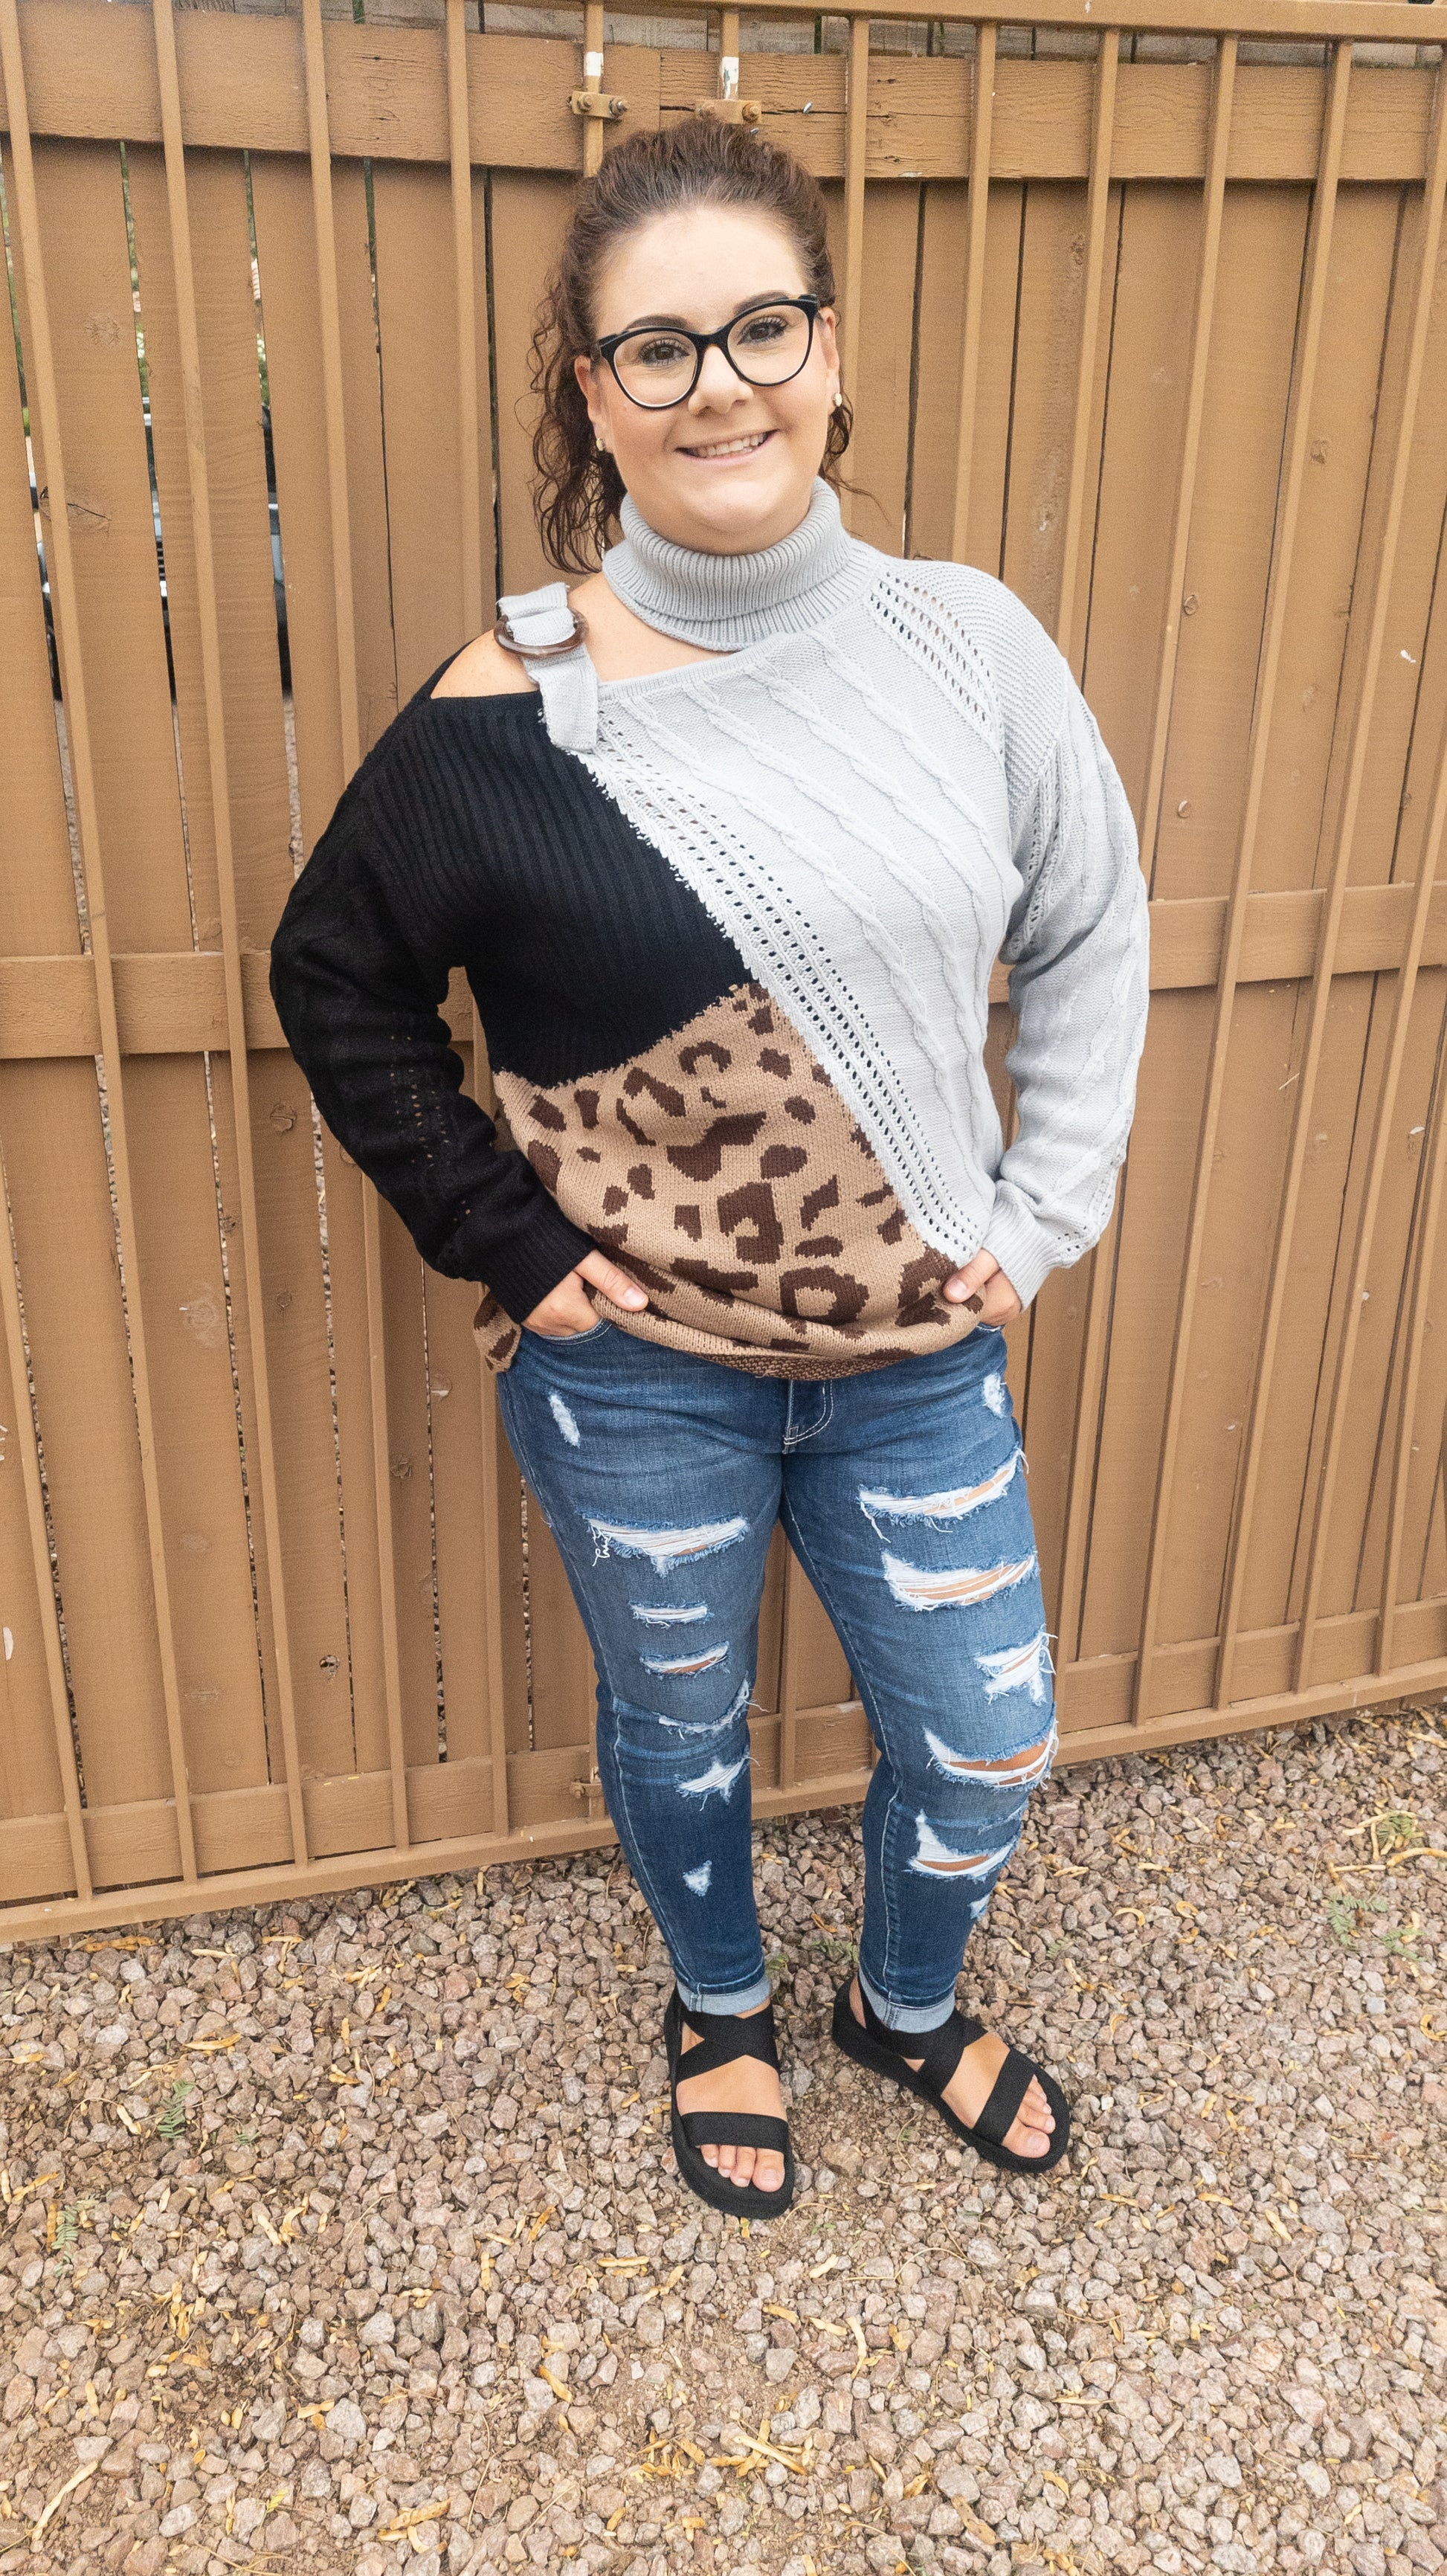 This is a comfy unique block sweater. featuring a gray, black and leopard color block turtleneck with one cut-out shoulder and a non-functioning buckle.  It has an added design on the front that you will not find anywhere else.  You will definitely stand out with this unique sweater.  Wear this with your favorite jeans or skirt.  This would be the perfect sweater for the office, everyday wear, or hanging out with your family and friends. Sizes small through 3XL.